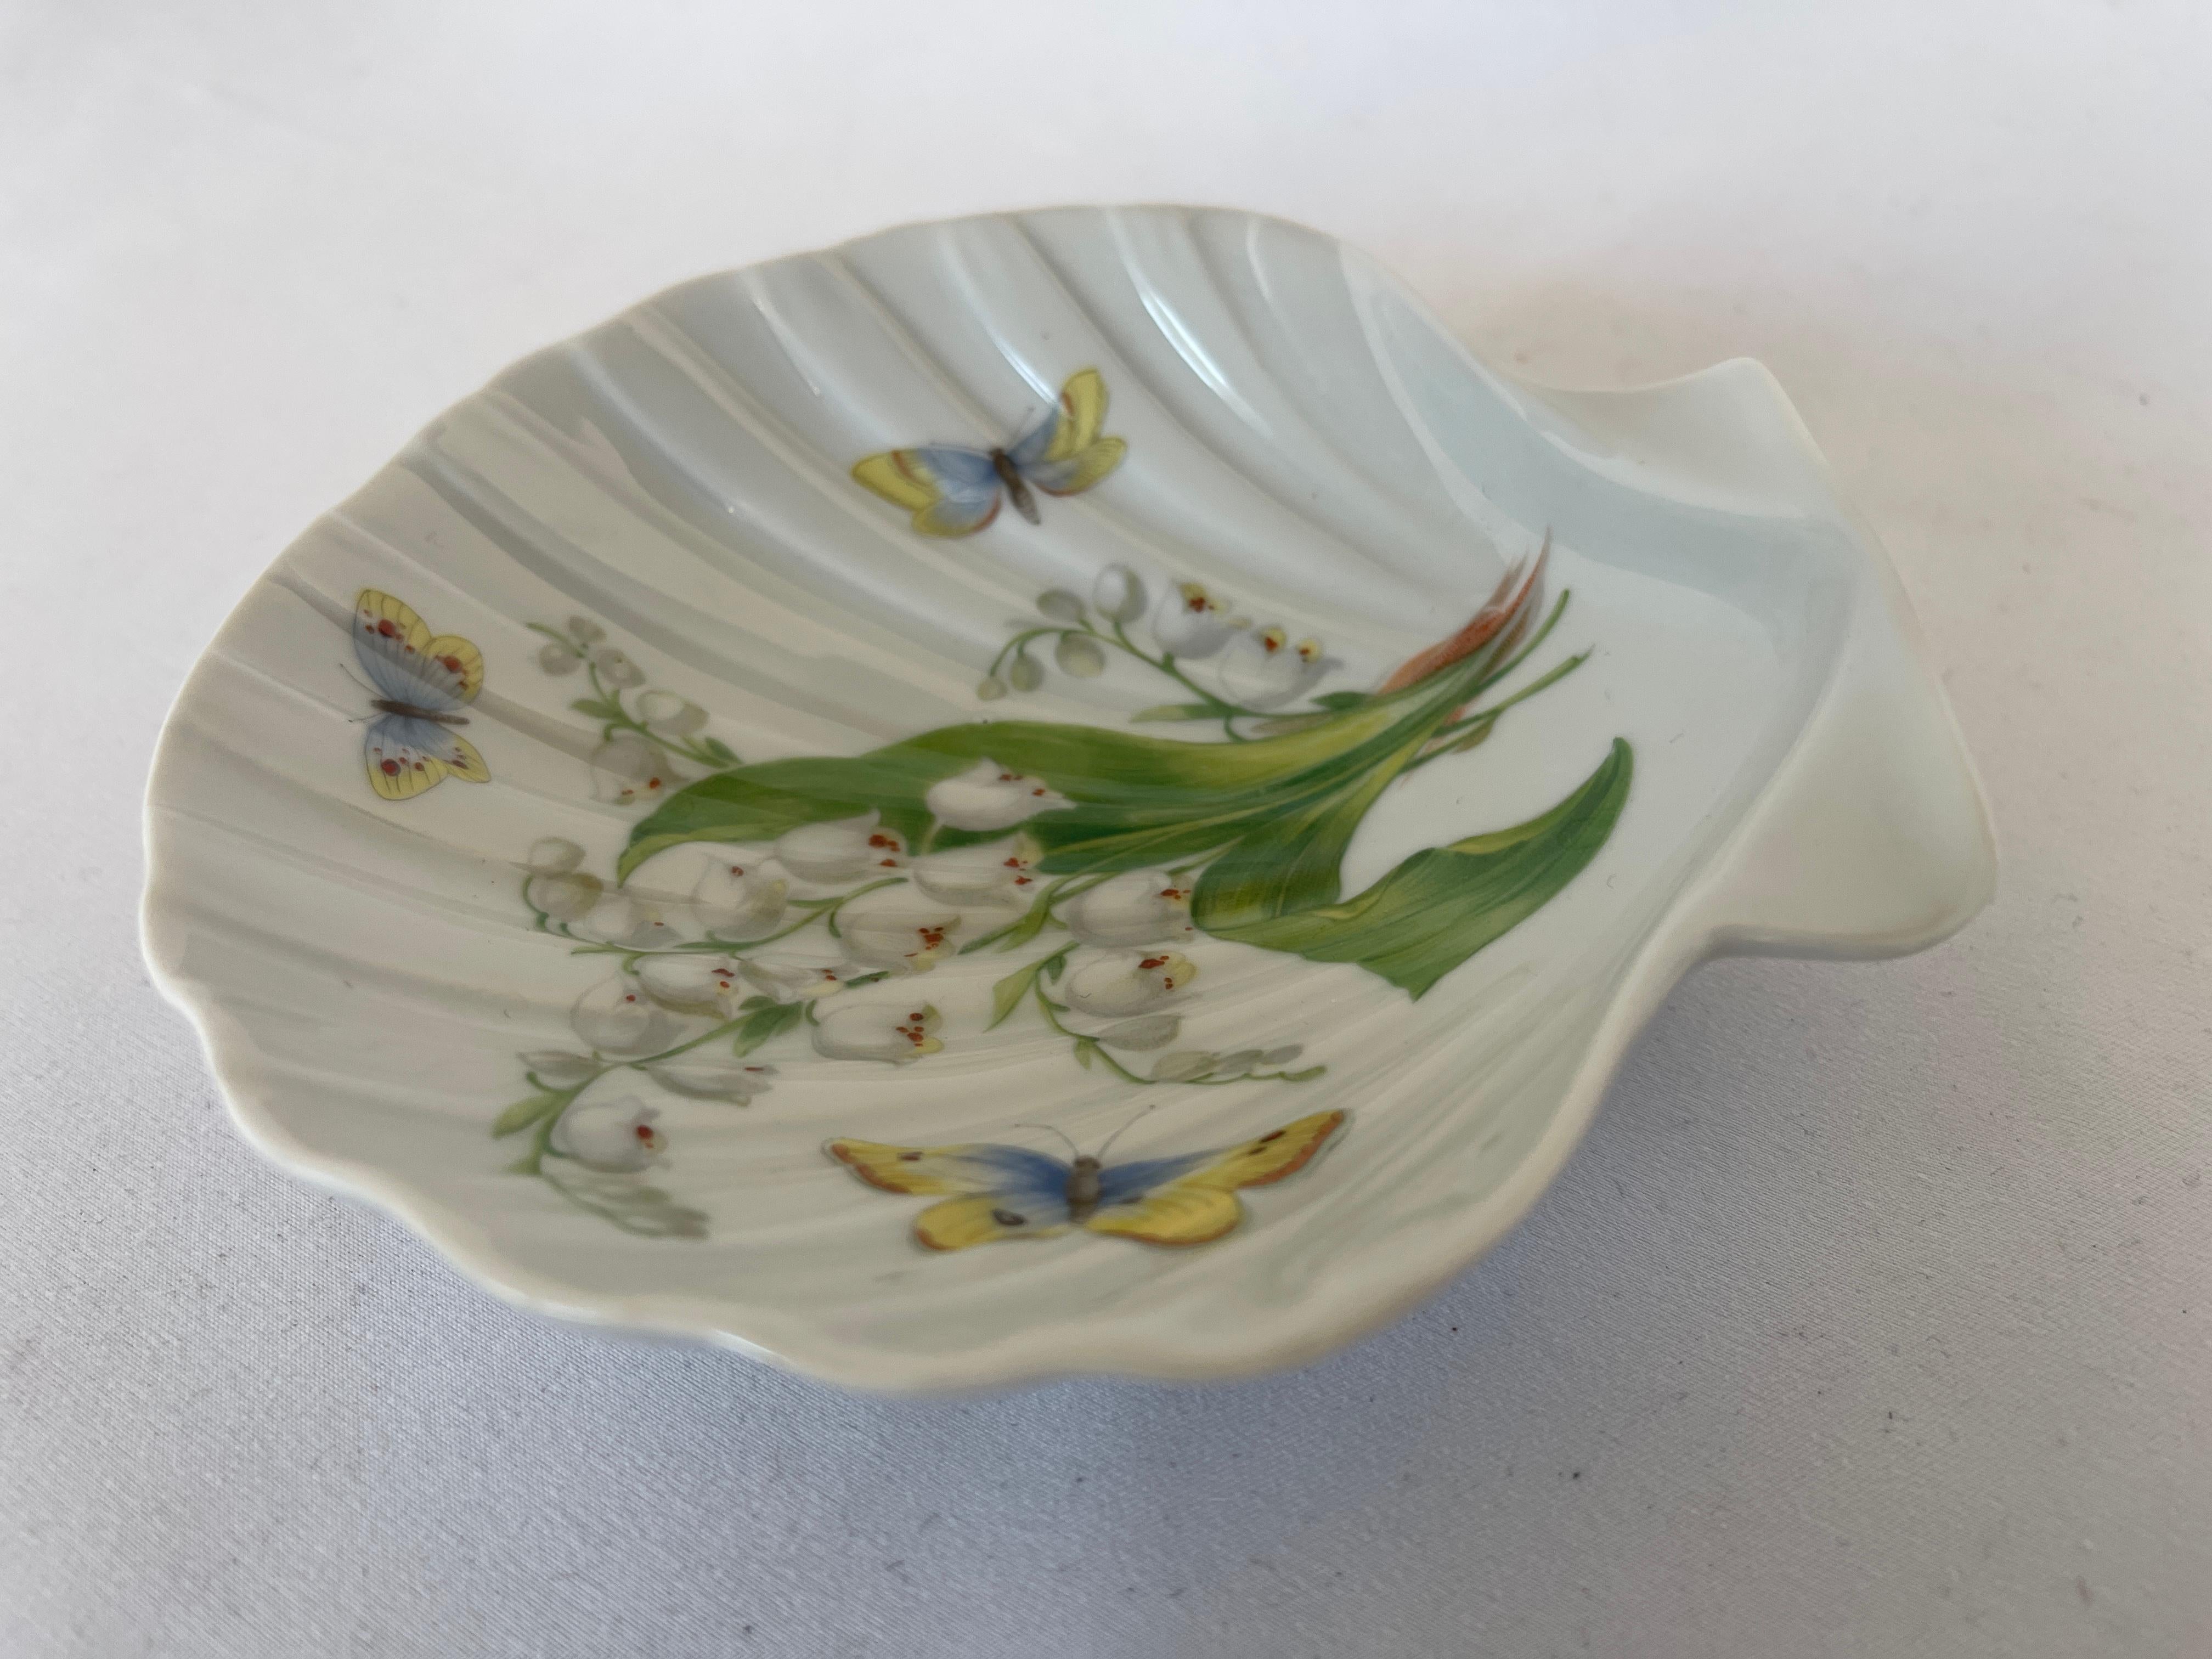 Limoges French Porcelain Sea Shell Dish W/ Hand Painted Lily-of-The-Valley Motif For Sale 2